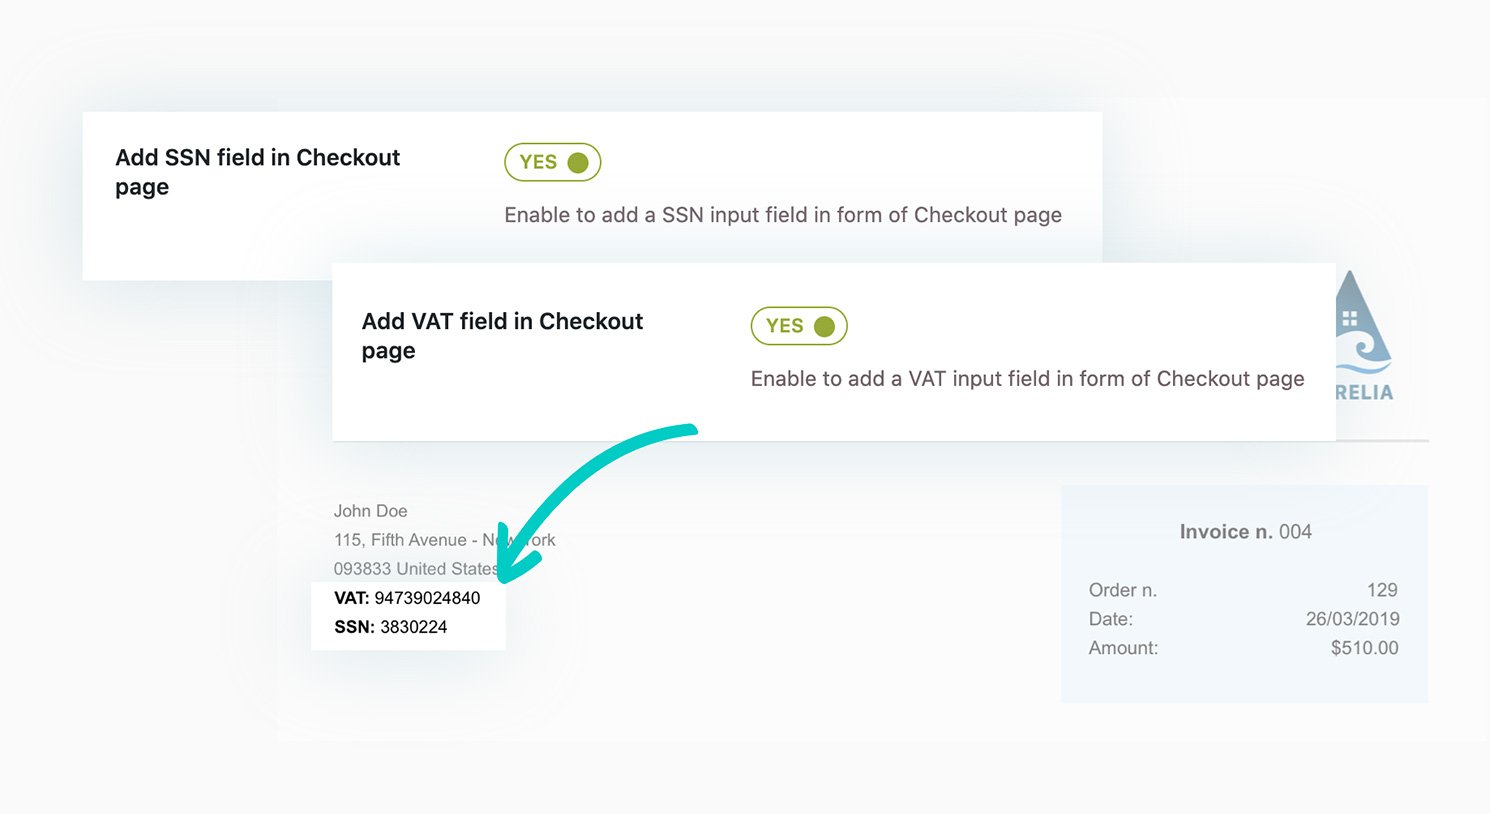 YITH-WooCommerce-PDF-Invoices-Packing-Slip-VAT-SSN-Fields-Invoices